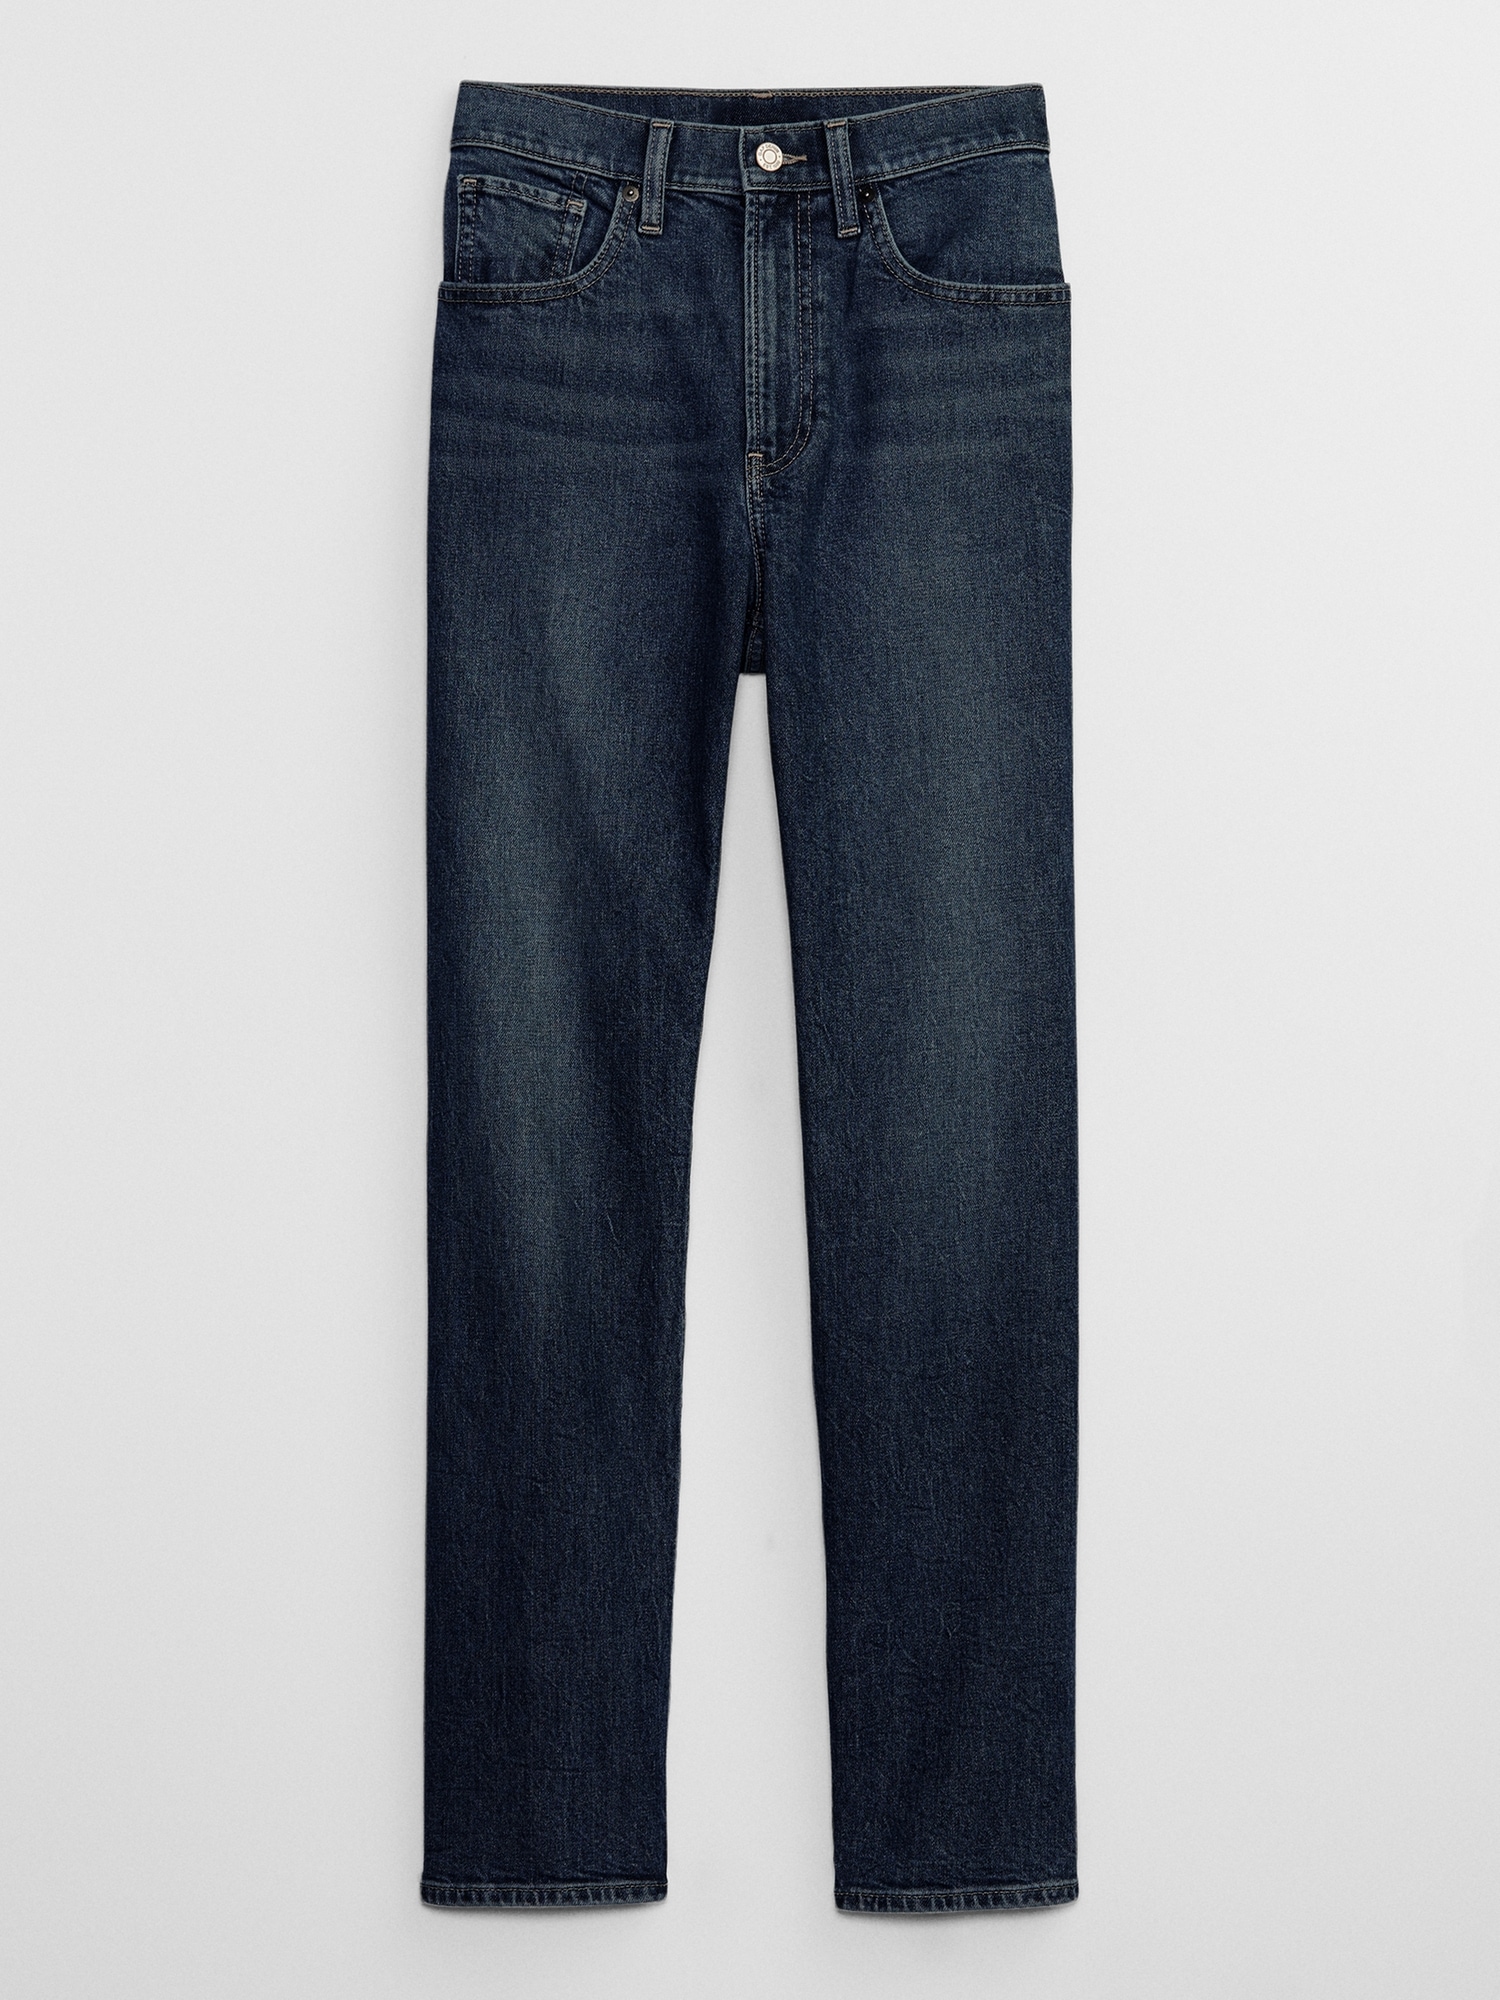 High Rise '90s Original Straight Jeans with Washwell | Gap Factory